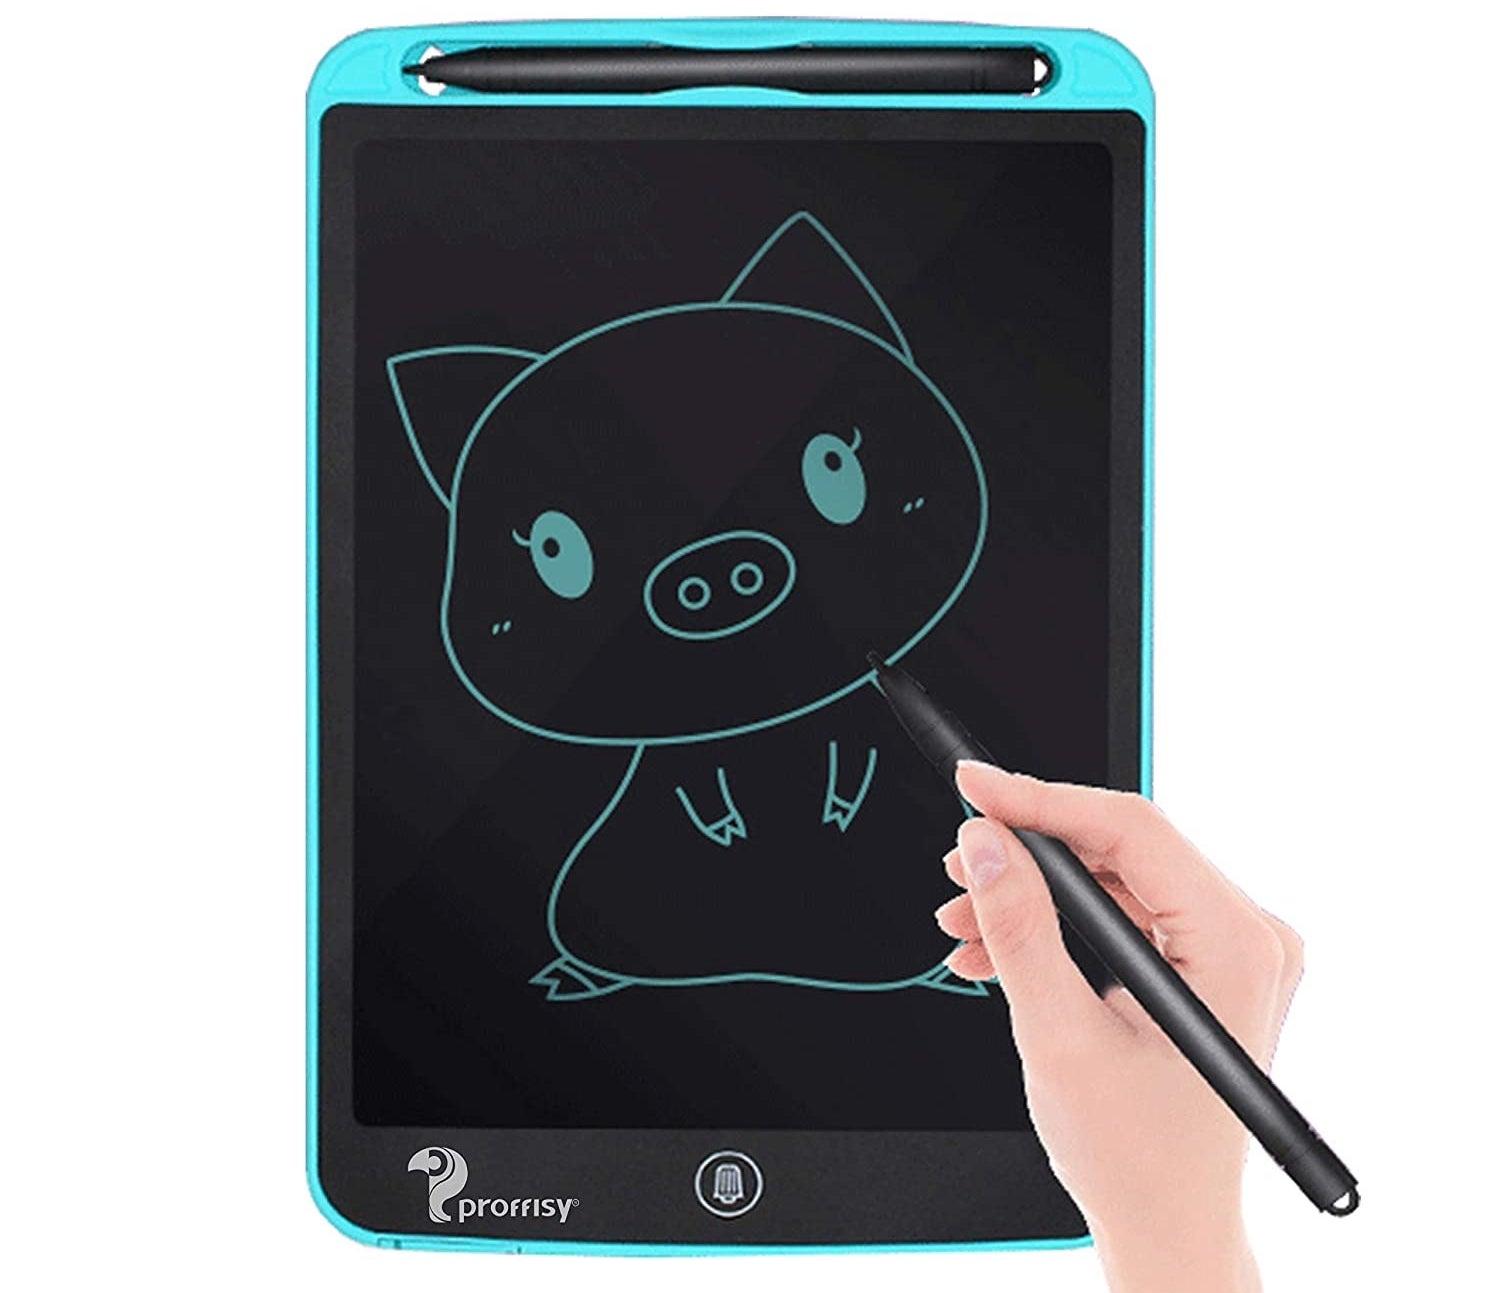 A Proffisy LCD Writing Pad in blue.